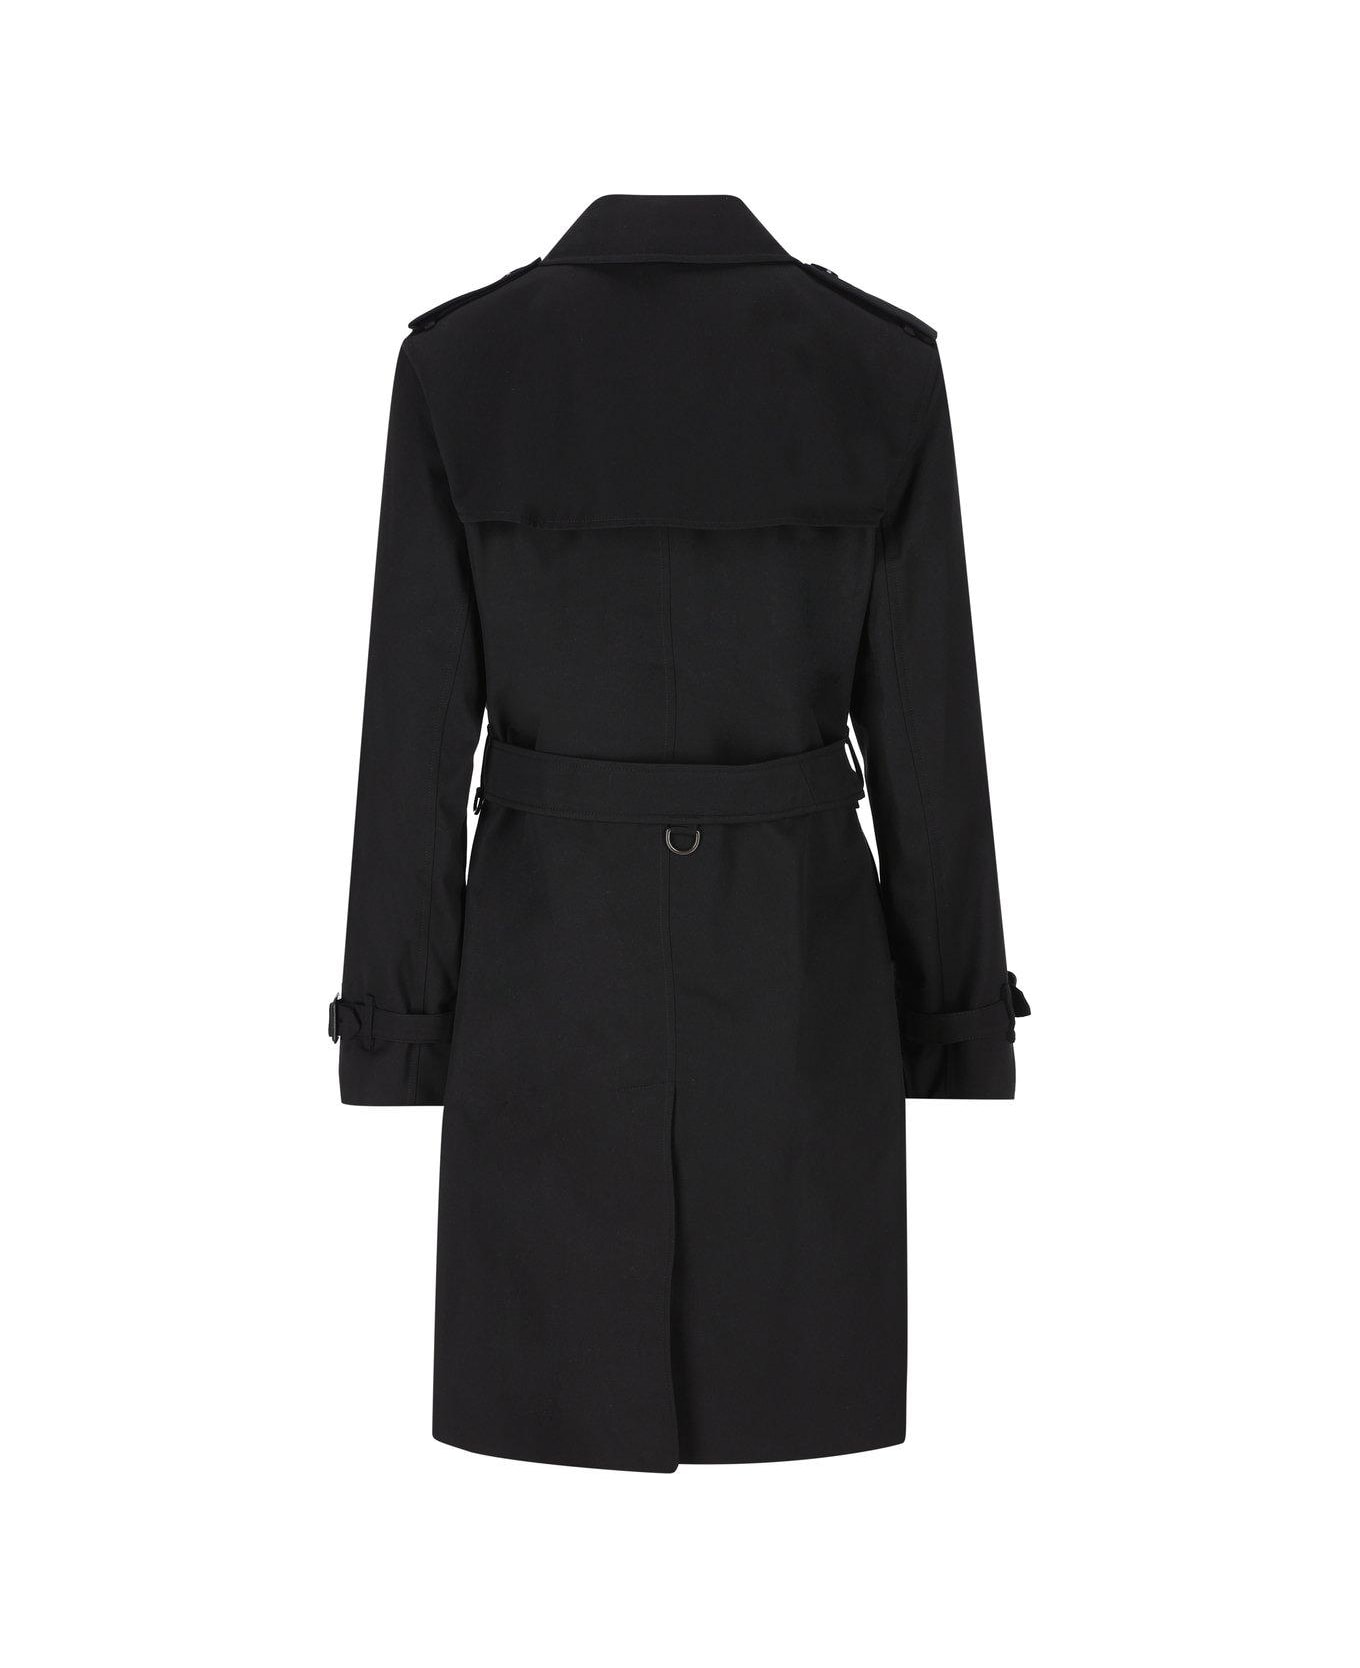 Burberry Double Breasted Belted Trench Coat - BLACK レインコート